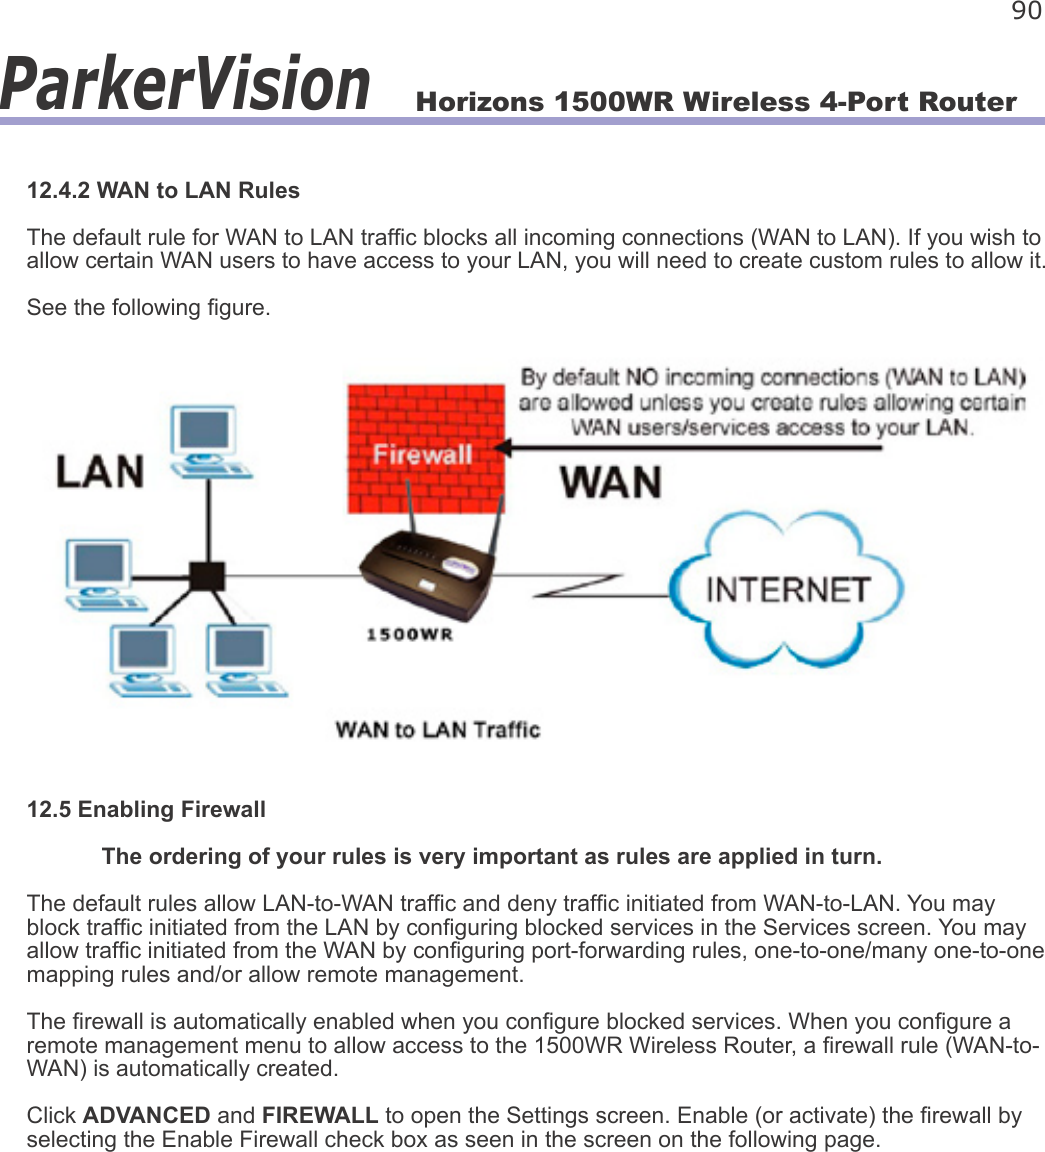 Horizons 1500WR Wireless 4-Port Router 90ParkerVision12.4.2 WAN to LAN RulesThe default rule for WAN to LAN trafc blocks all incoming connections (WAN to LAN). If you wish to allow certain WAN users to have access to your LAN, you will need to create custom rules to allow it.See the following gure.12.5 Enabling Firewall  The ordering of your rules is very important as rules are applied in turn. The default rules allow LAN-to-WAN trafc and deny trafc initiated from WAN-to-LAN. You may block trafc initiated from the LAN by conguring blocked services in the Services screen. You may allow trafc initiated from the WAN by conguring port-forwarding rules, one-to-one/many one-to-one mapping rules and/or allow remote management.The rewall is automatically enabled when you congure blocked services. When you congure a remote management menu to allow access to the 1500WR Wireless Router, a rewall rule (WAN-to-WAN) is automatically created.Click ADVANCED and FIREWALL to open the Settings screen. Enable (or activate) the rewall by selecting the Enable Firewall check box as seen in the screen on the following page.